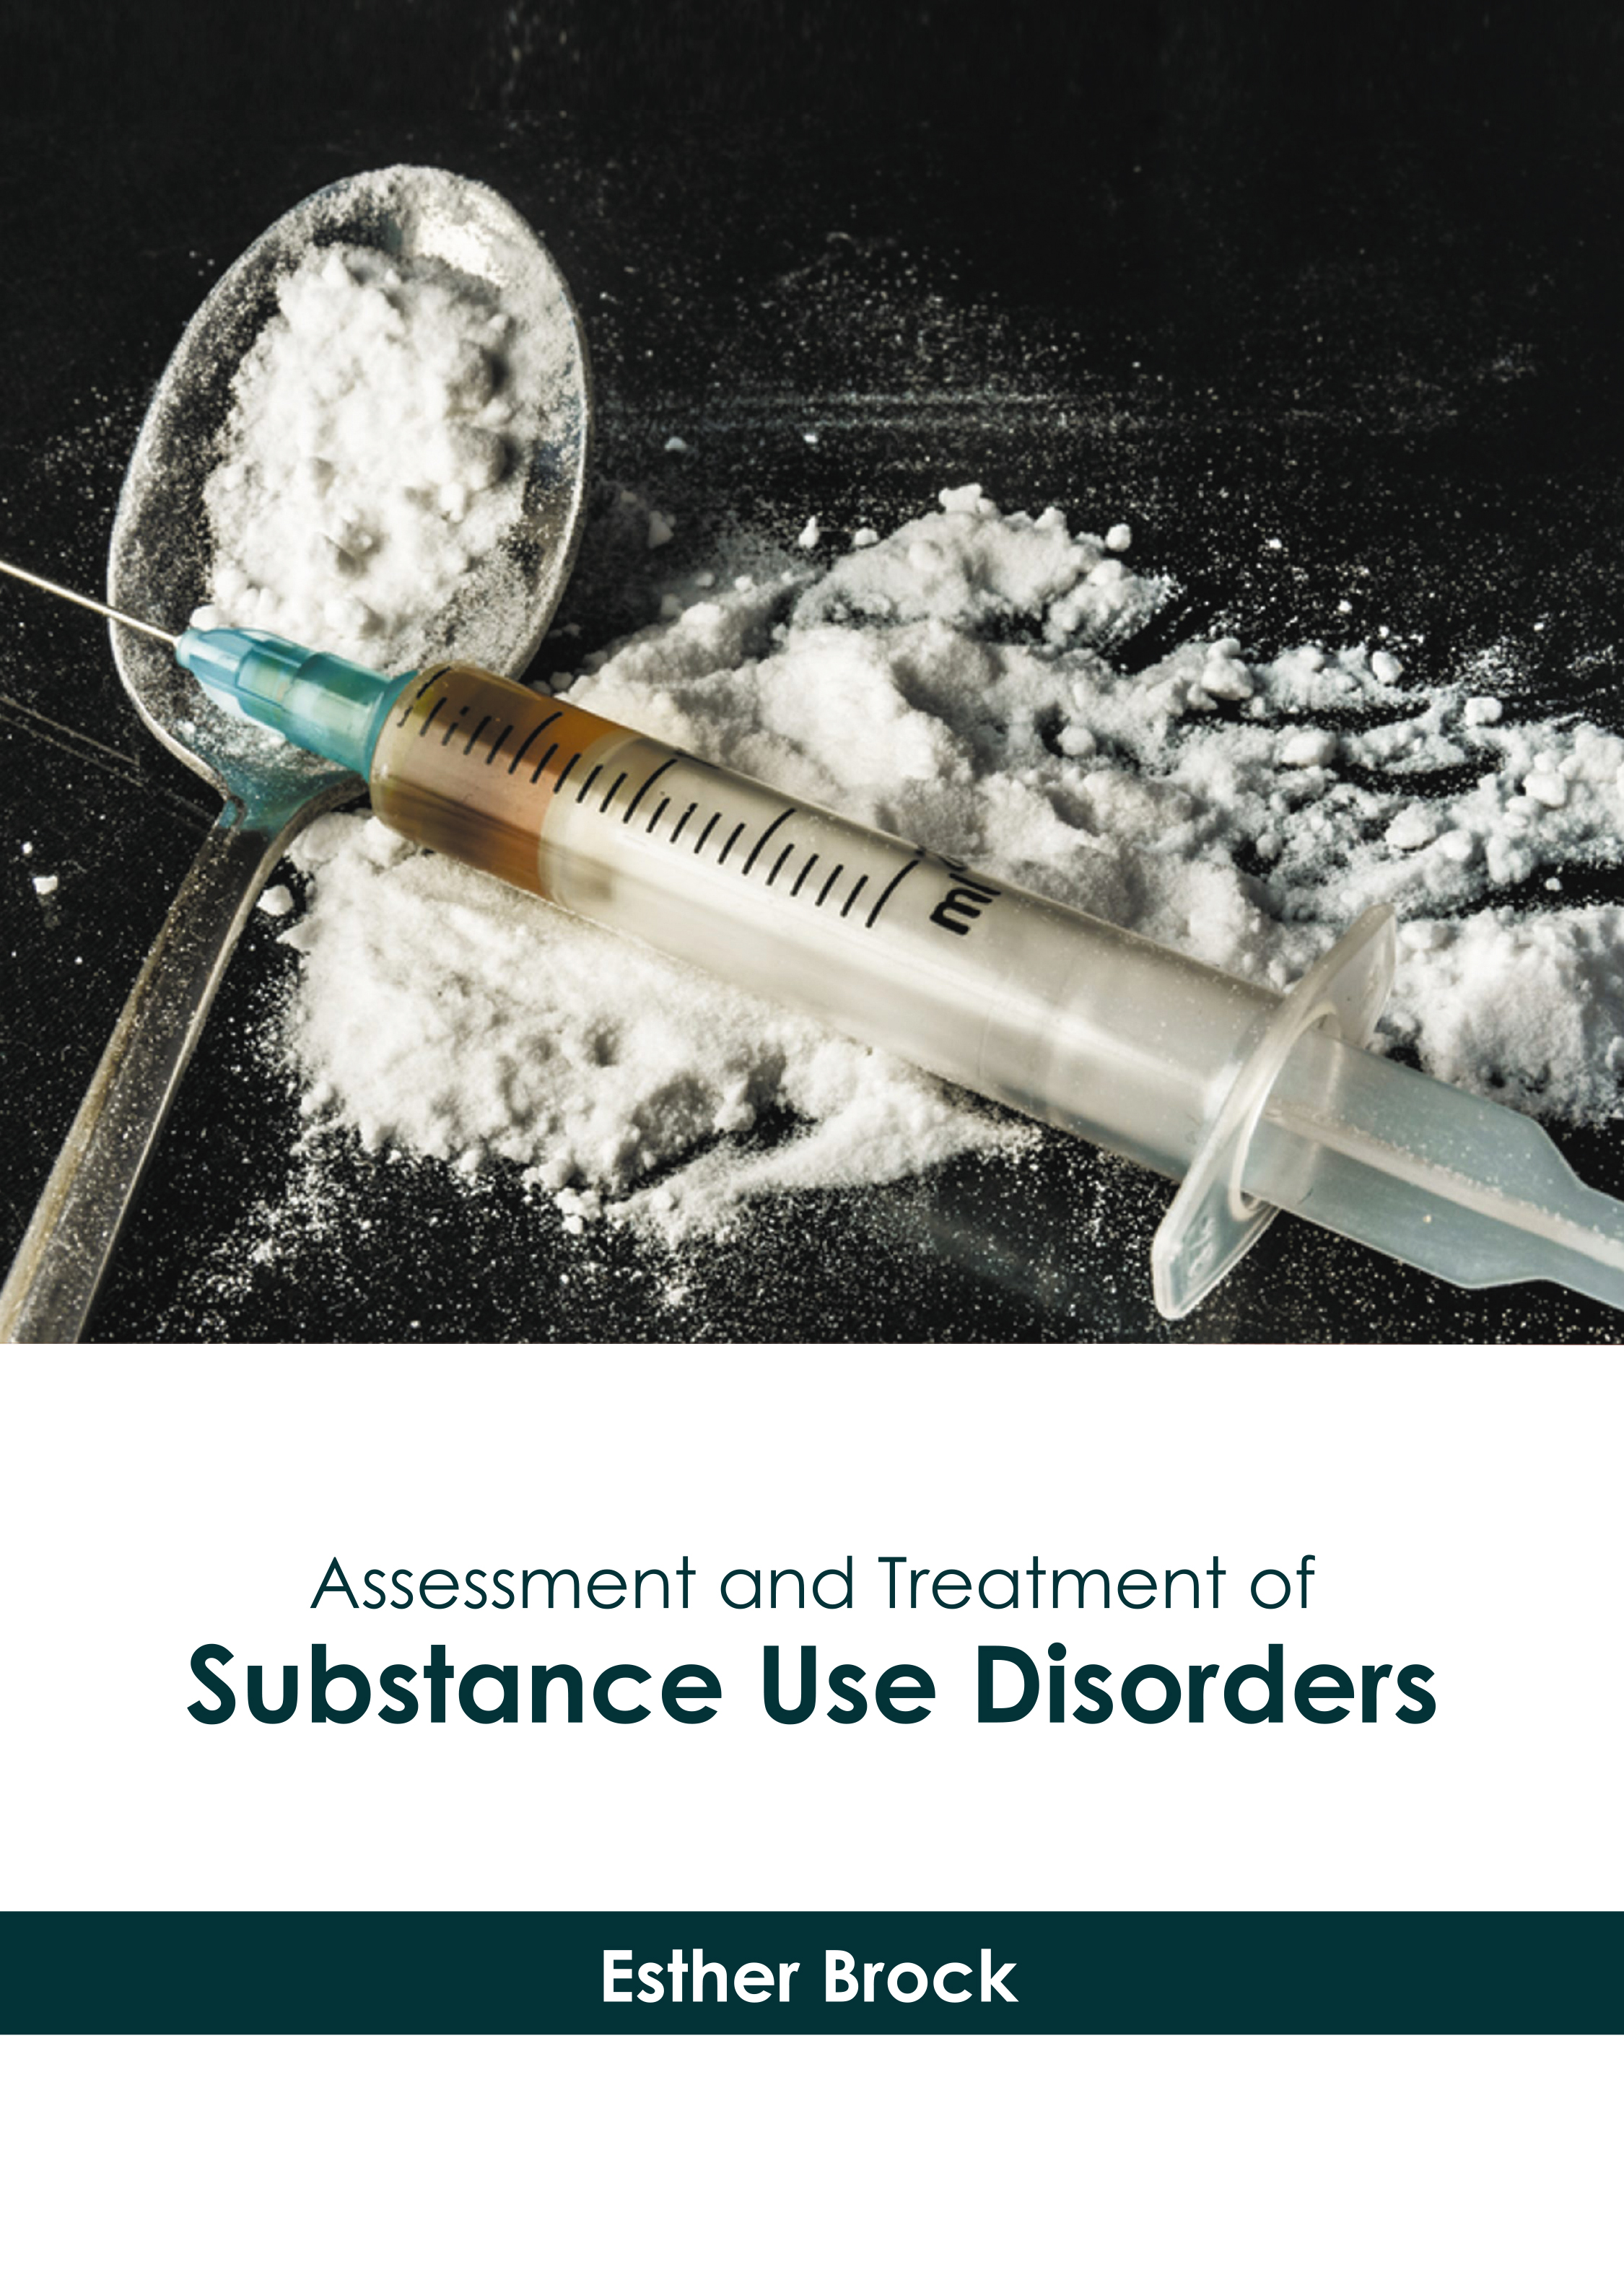 ASSESSMENT AND TREATMENT OF SUBSTANCE USE DISORDERS | ISBN: 9781639270897